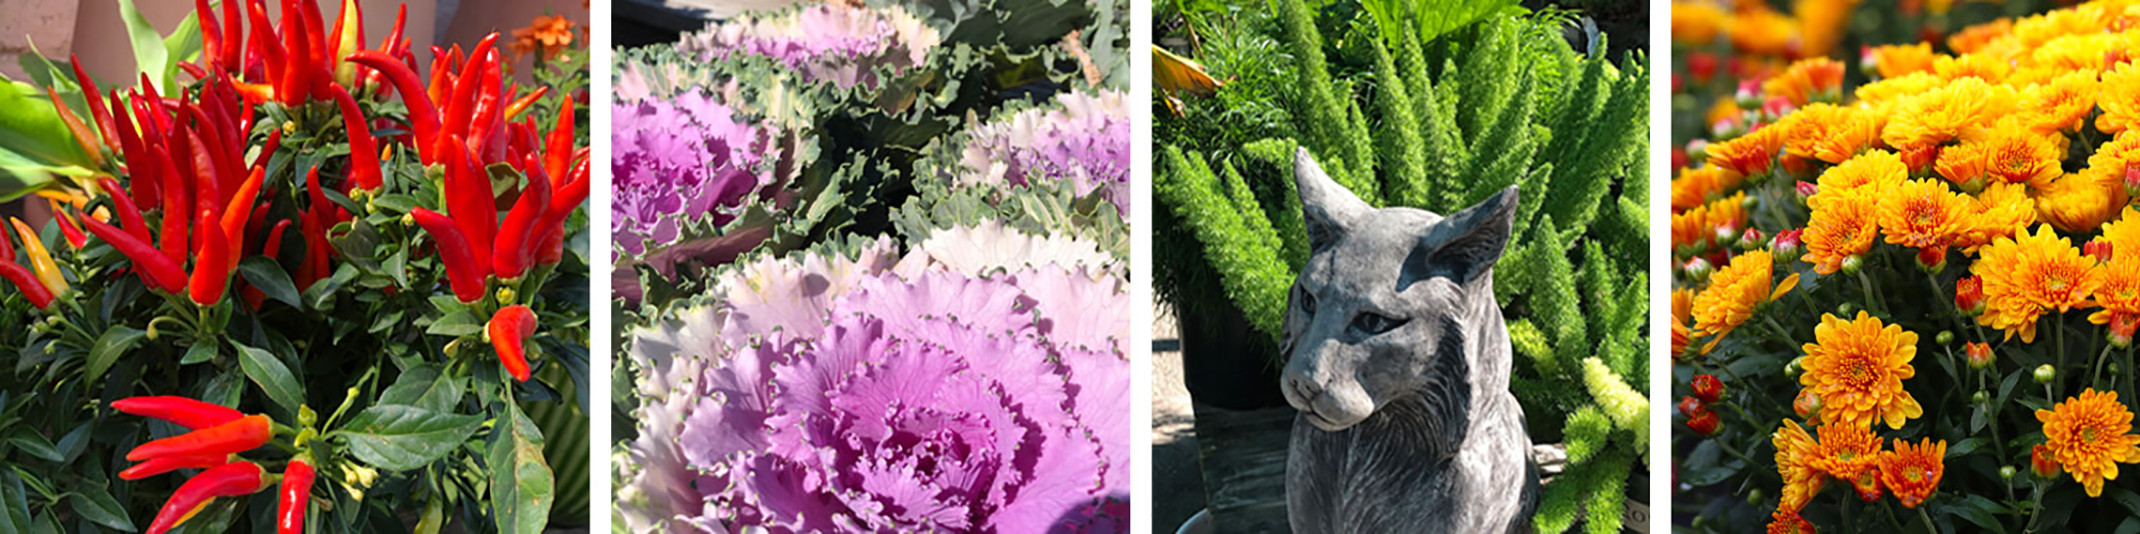 4 images of cool season plants starting with ornamental red peppers, then ornamental cabbage, followed by and image of the los gatos statue in front of ferns and the last image is orange mums